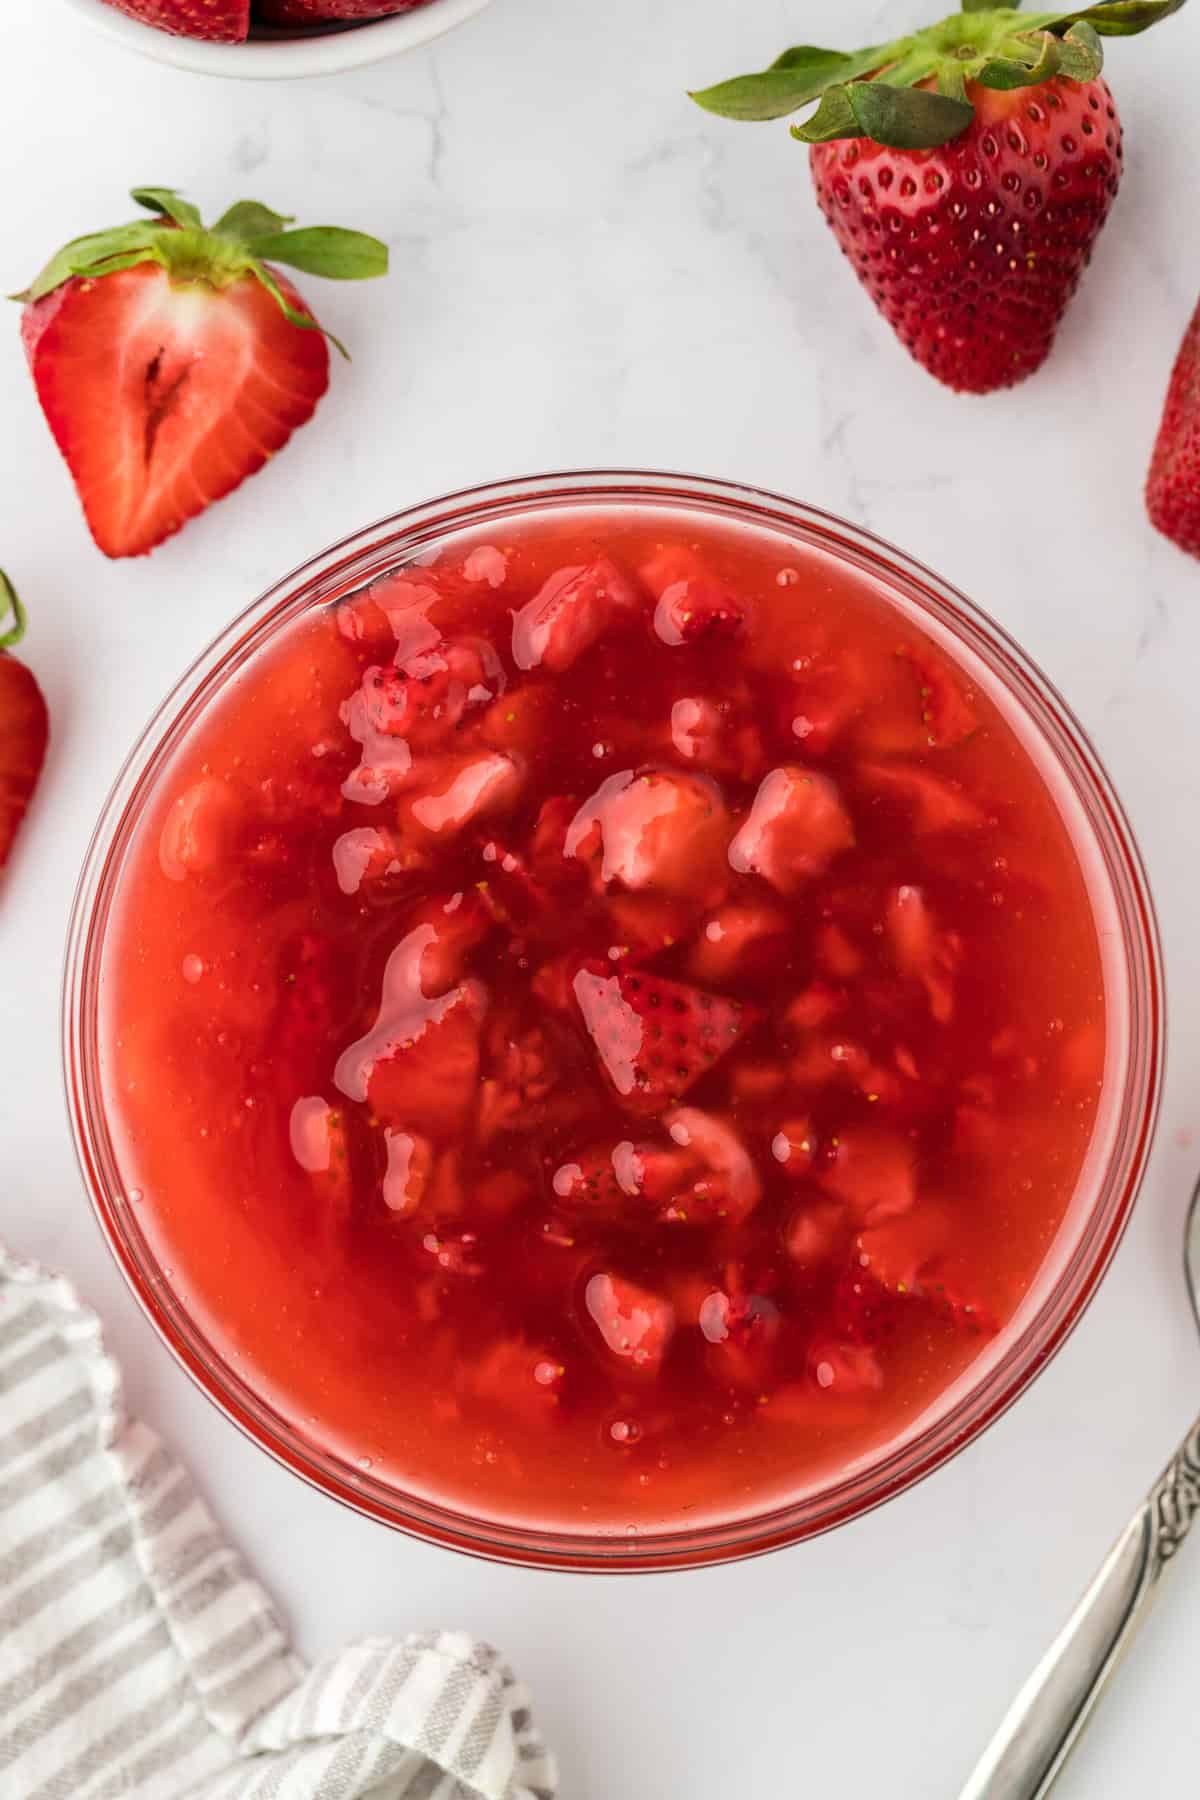 Closeup of a bowl of freshly made strawberry sauce on a white background. Surrounding the bowl are several strawberries and a white cloth.